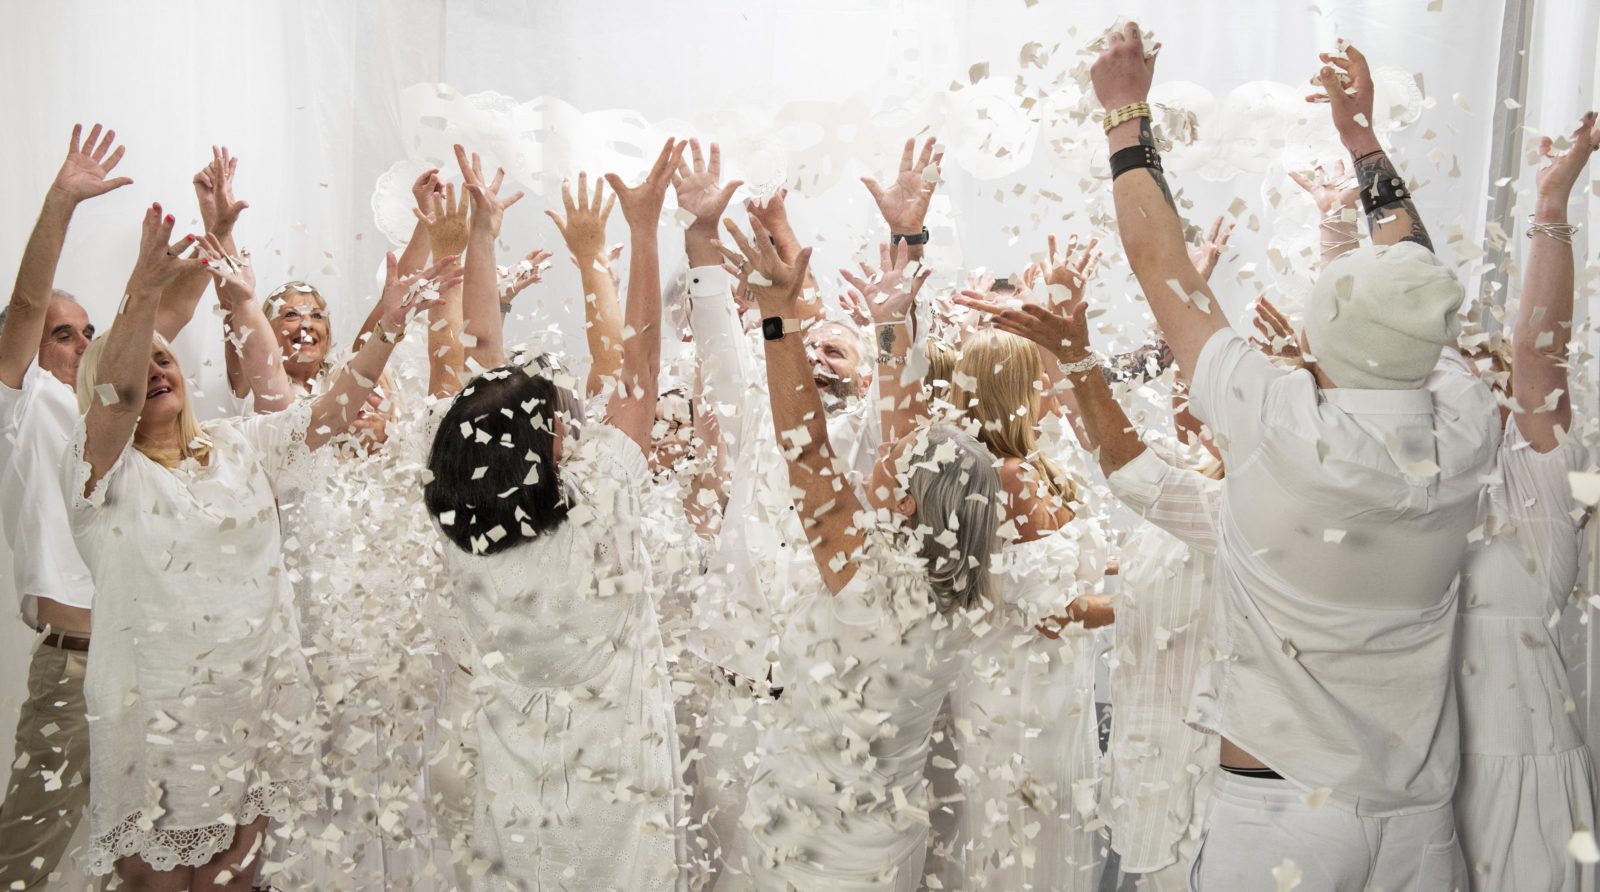 A group of people who are dressed all in white, are in a white room and throw white confetti in the air.